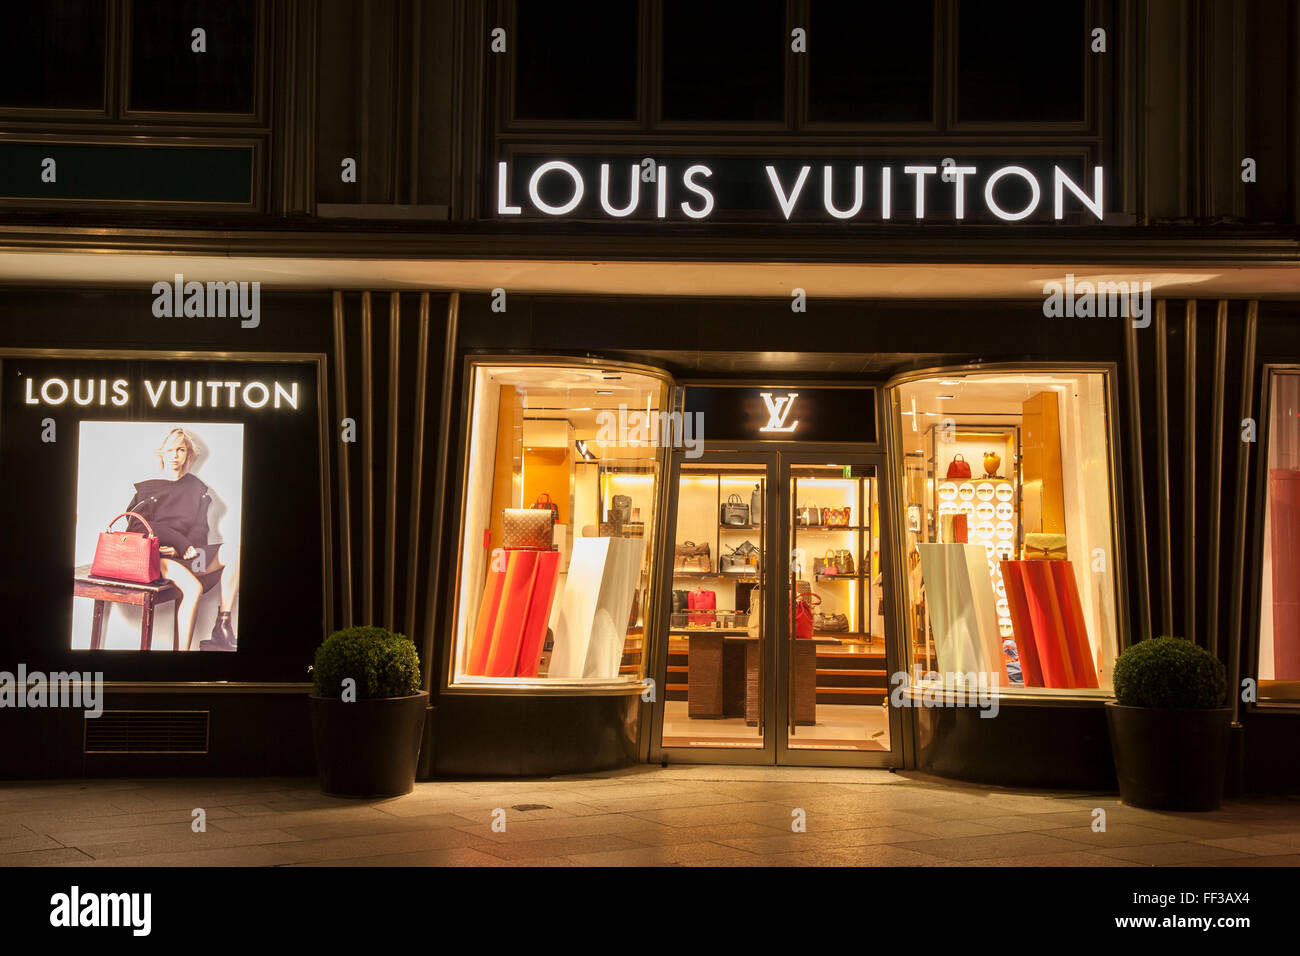 A Night at Louis Vuitton